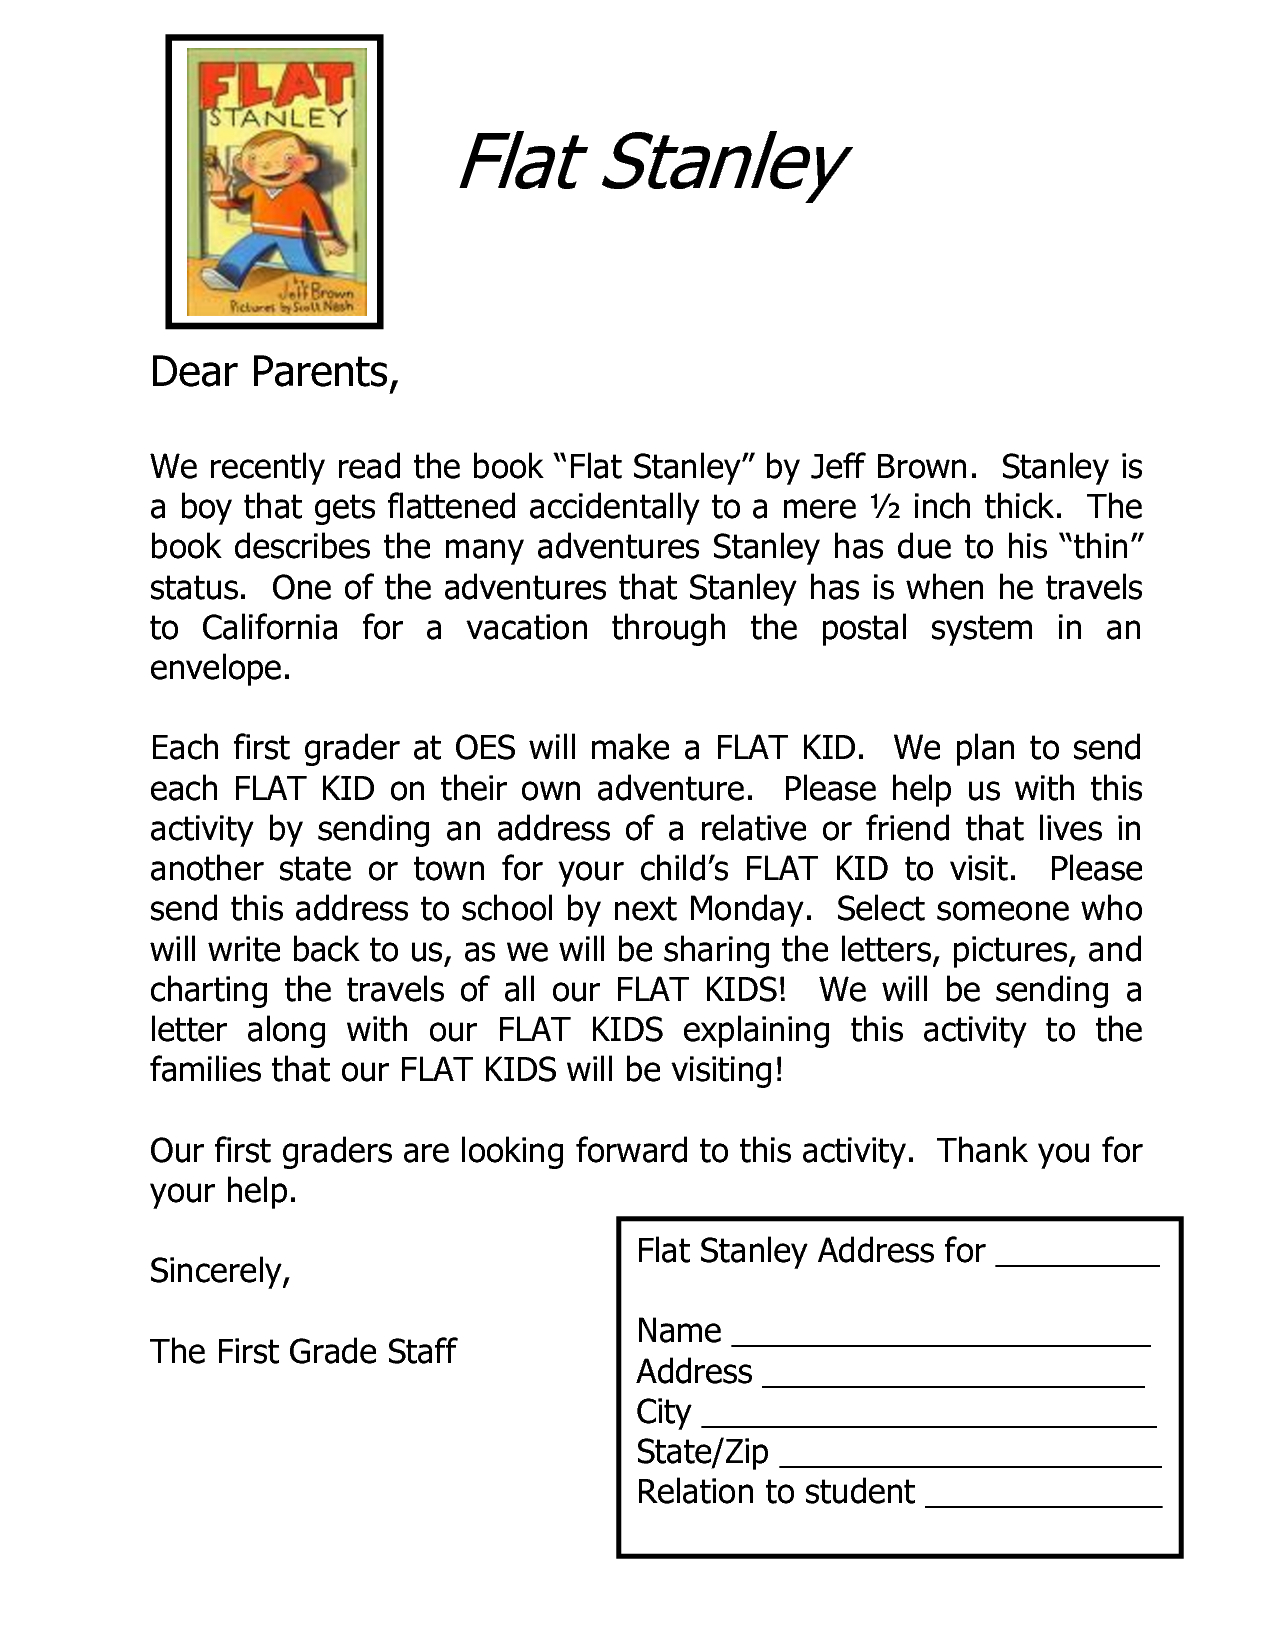 Flat Stanley Letter To Parents For Address  Google Search …  Flat pertaining to Flat Stanley Letter Template